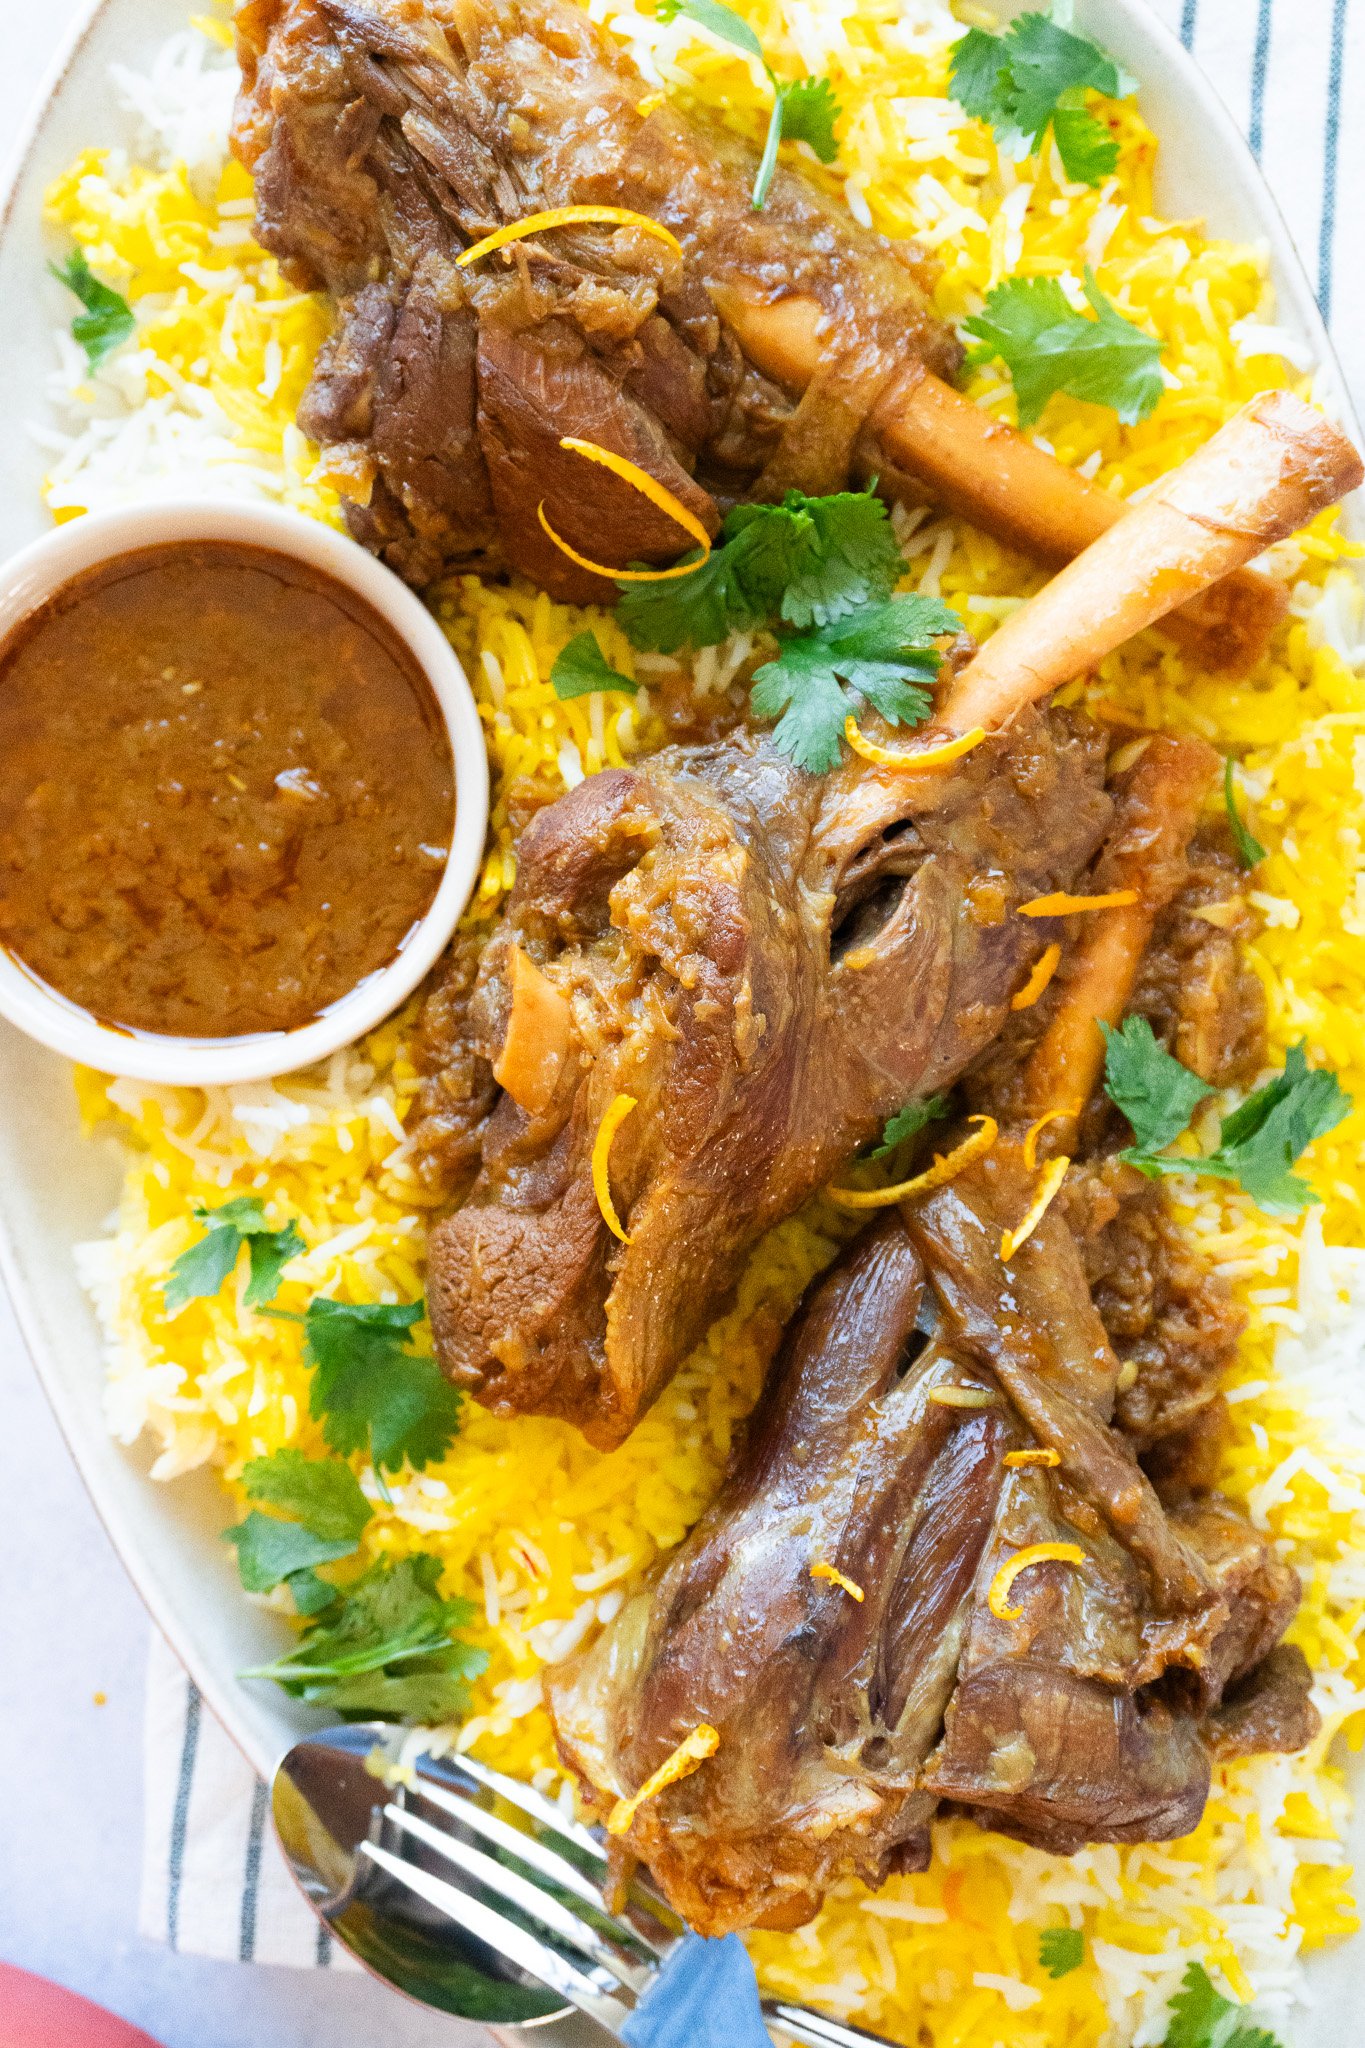 Delicious Persian Lamb Shank Recipe - Aromatic and tender lamb shank served with flavorful cooking juices.